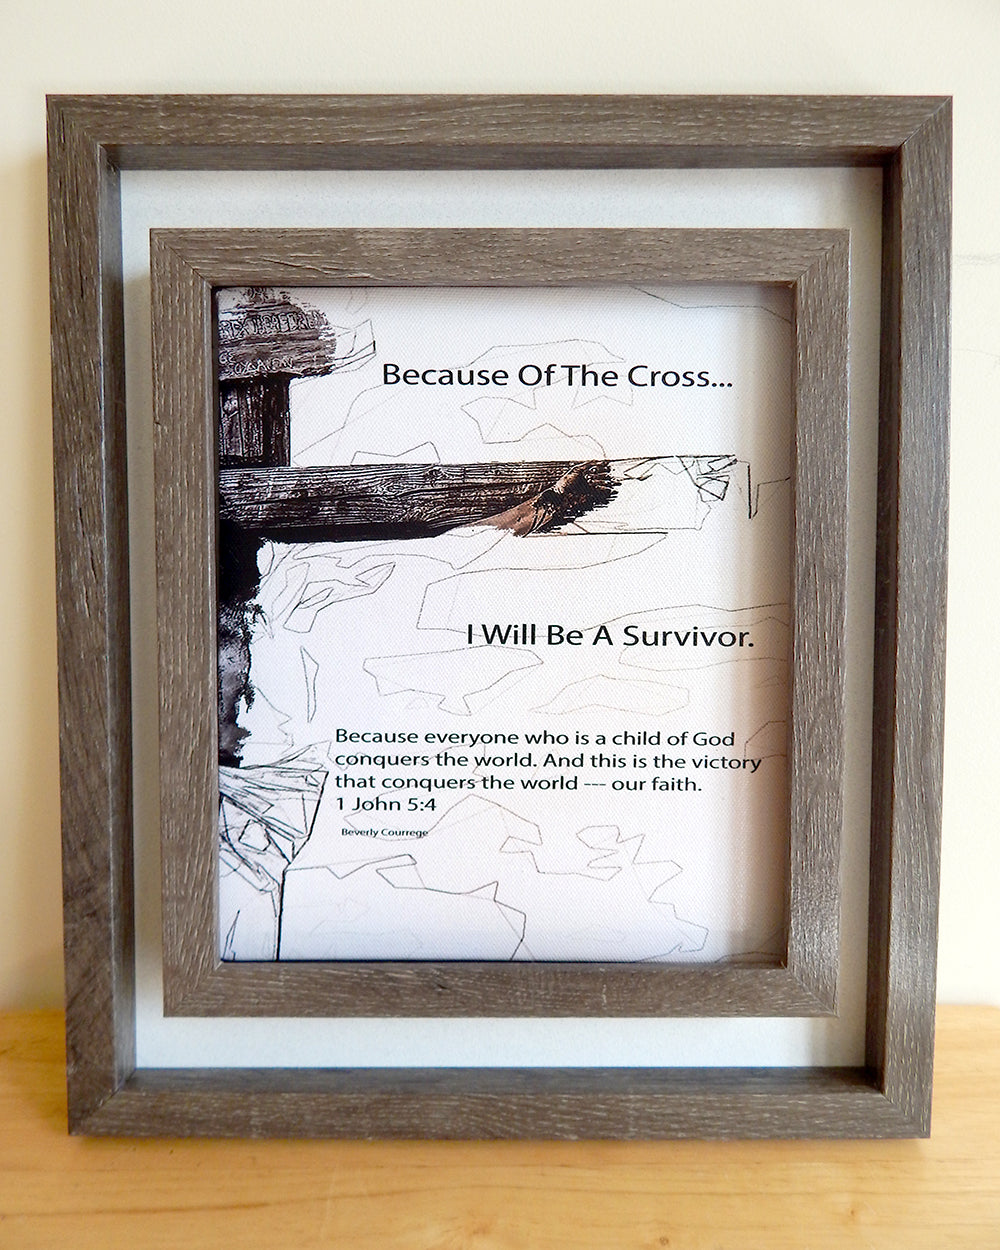 Because Of The Cross... Series -I WILL BE A SURVIVOR -(Canvas Print in unglass frame) Free Shipping